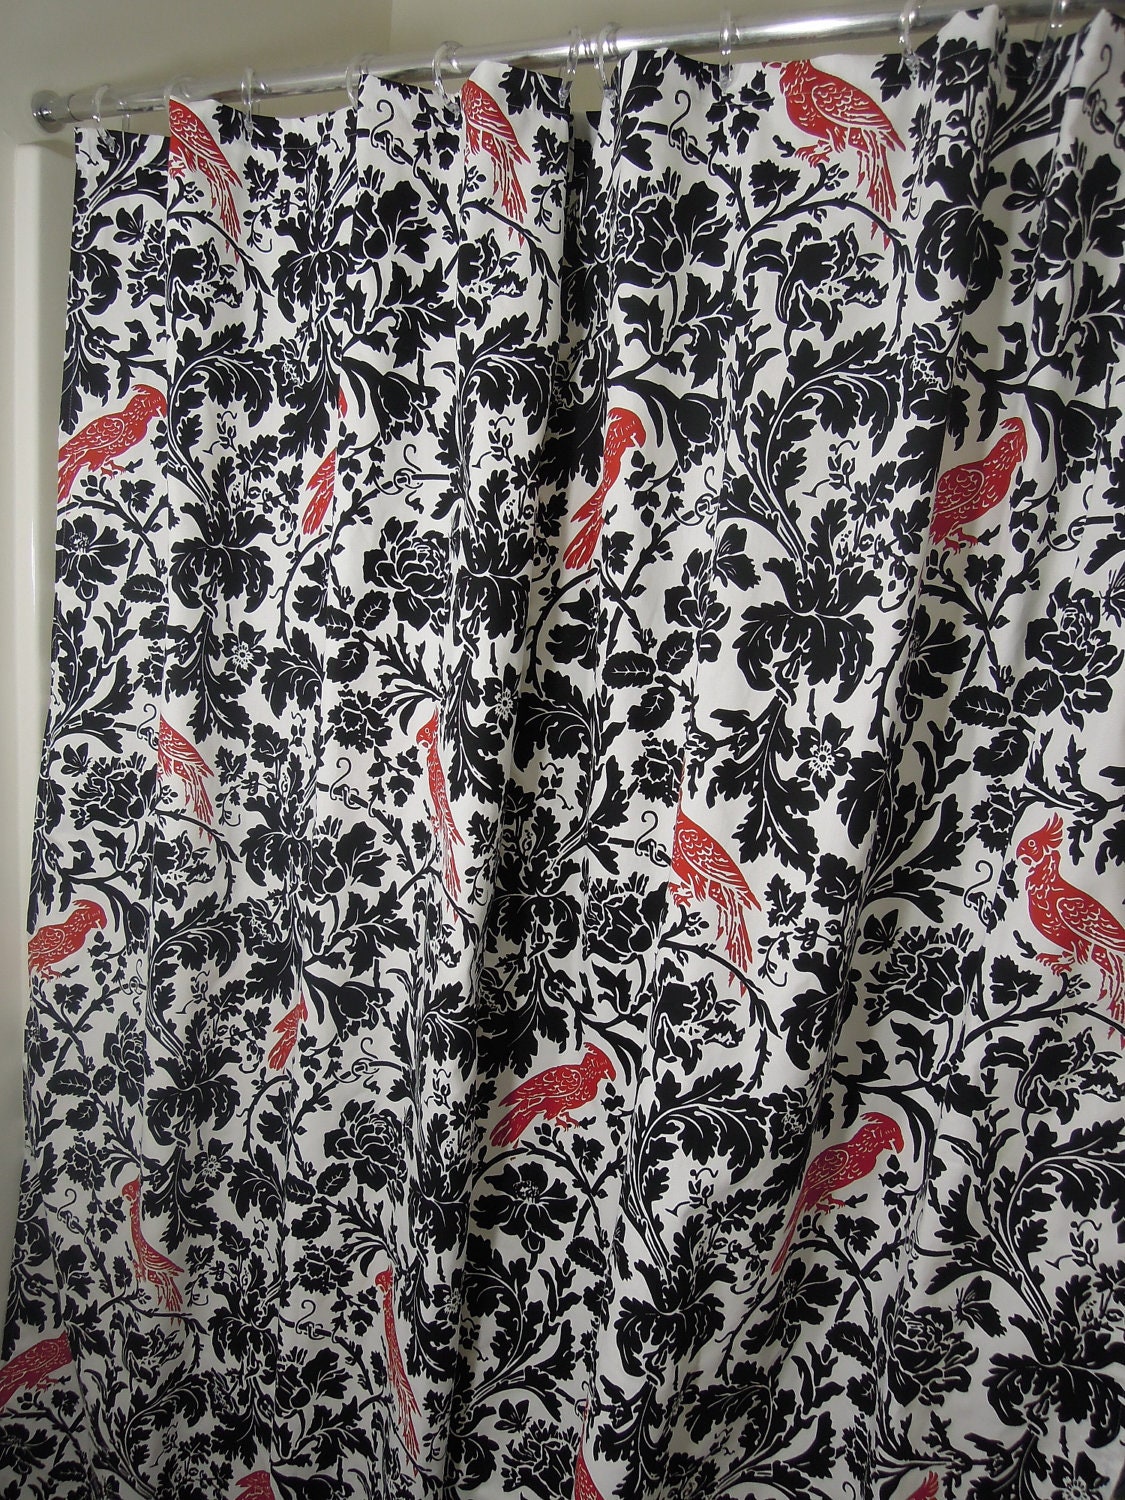 72x72 Shower curtain Black White Red Floral/Birds by thefarley4